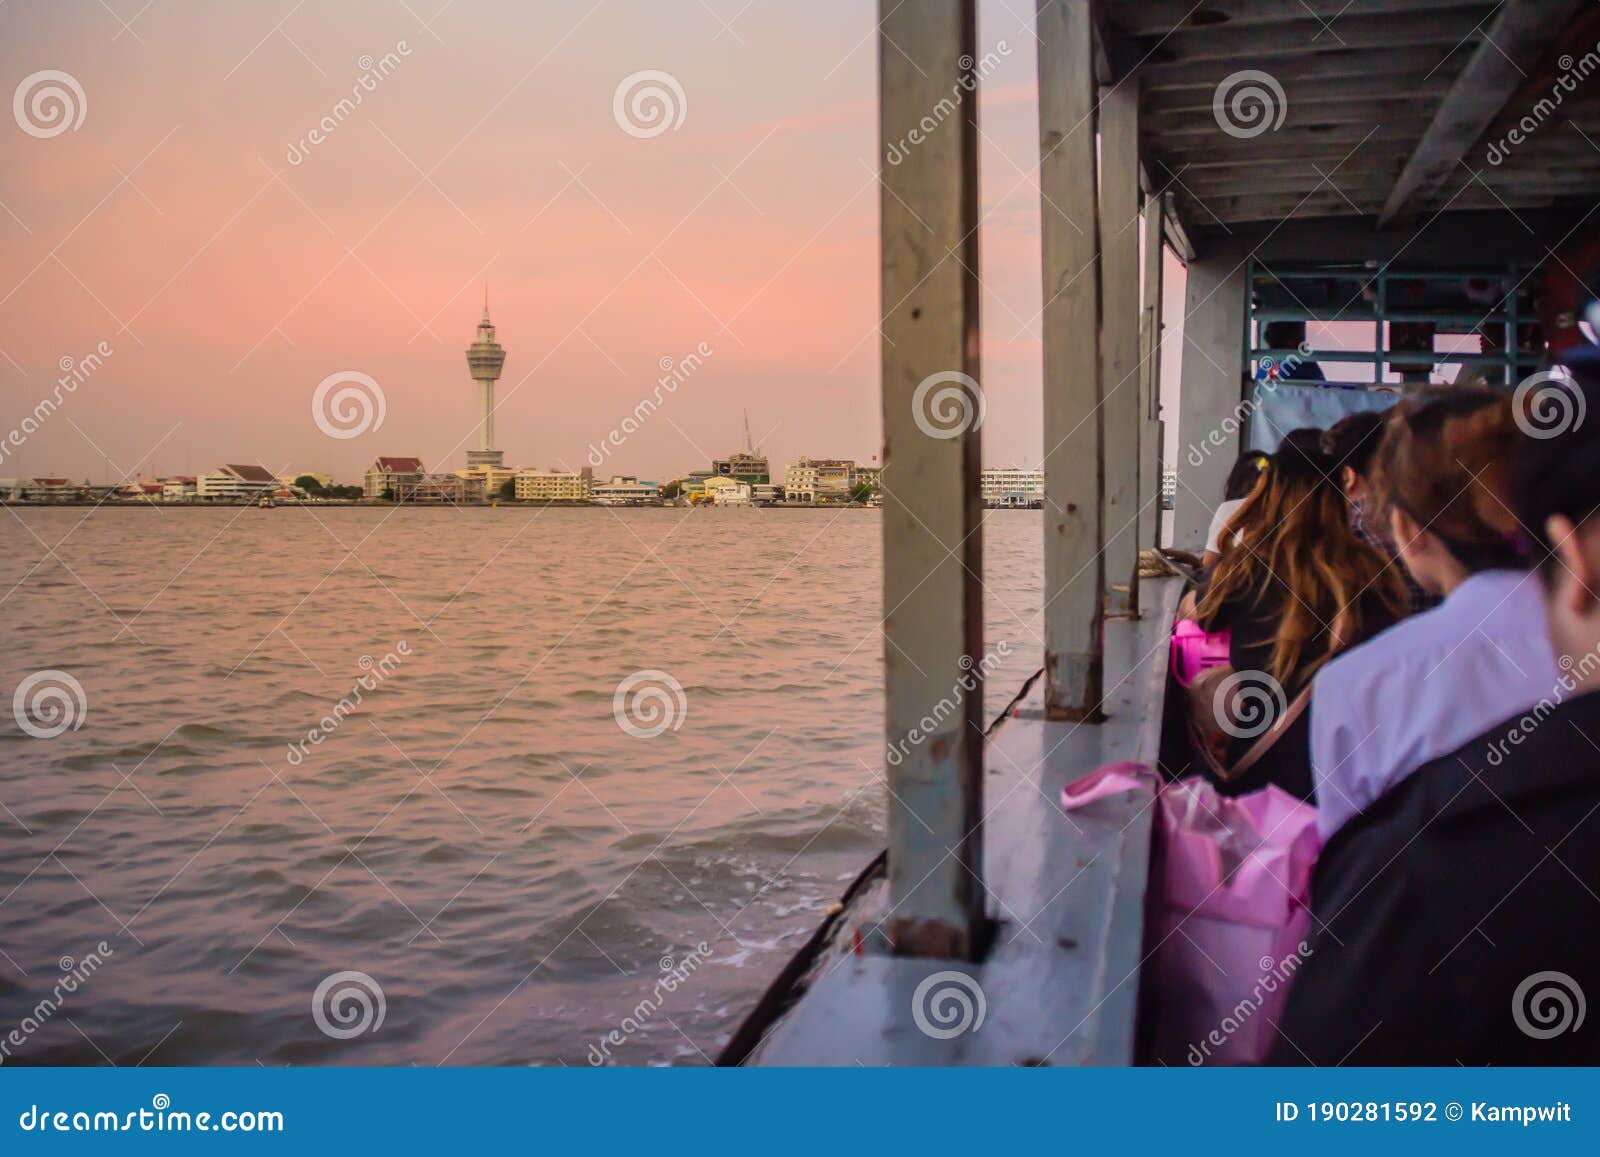 Riverfront View Of Samut Prakan City Hall With New Observation Tower And Boat Pier Samut Prakan Is At The Mouth Of The Chao Editorial Photography Image Of Modern Beautiful